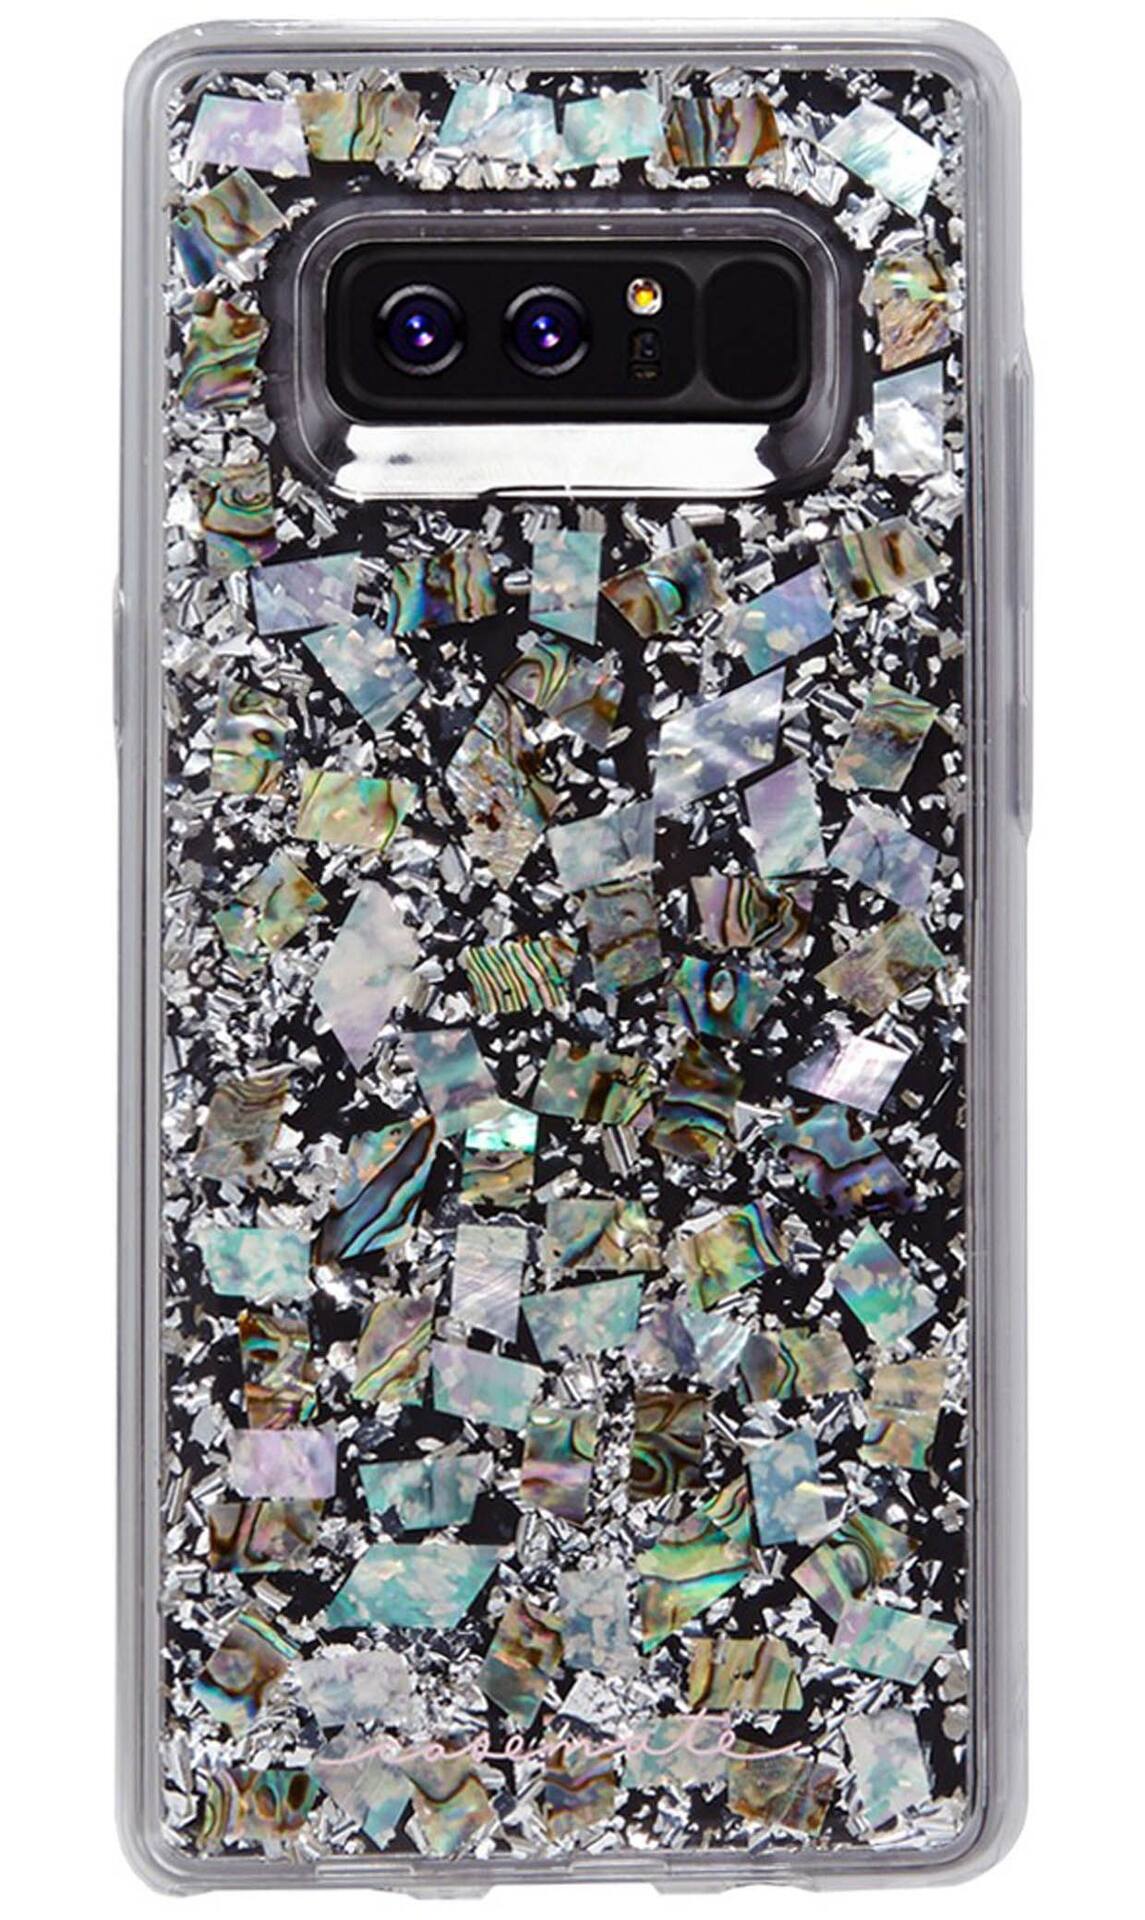 Case-Mate Karat Case for Samsung Galaxy Note 8, Mother of Pearl